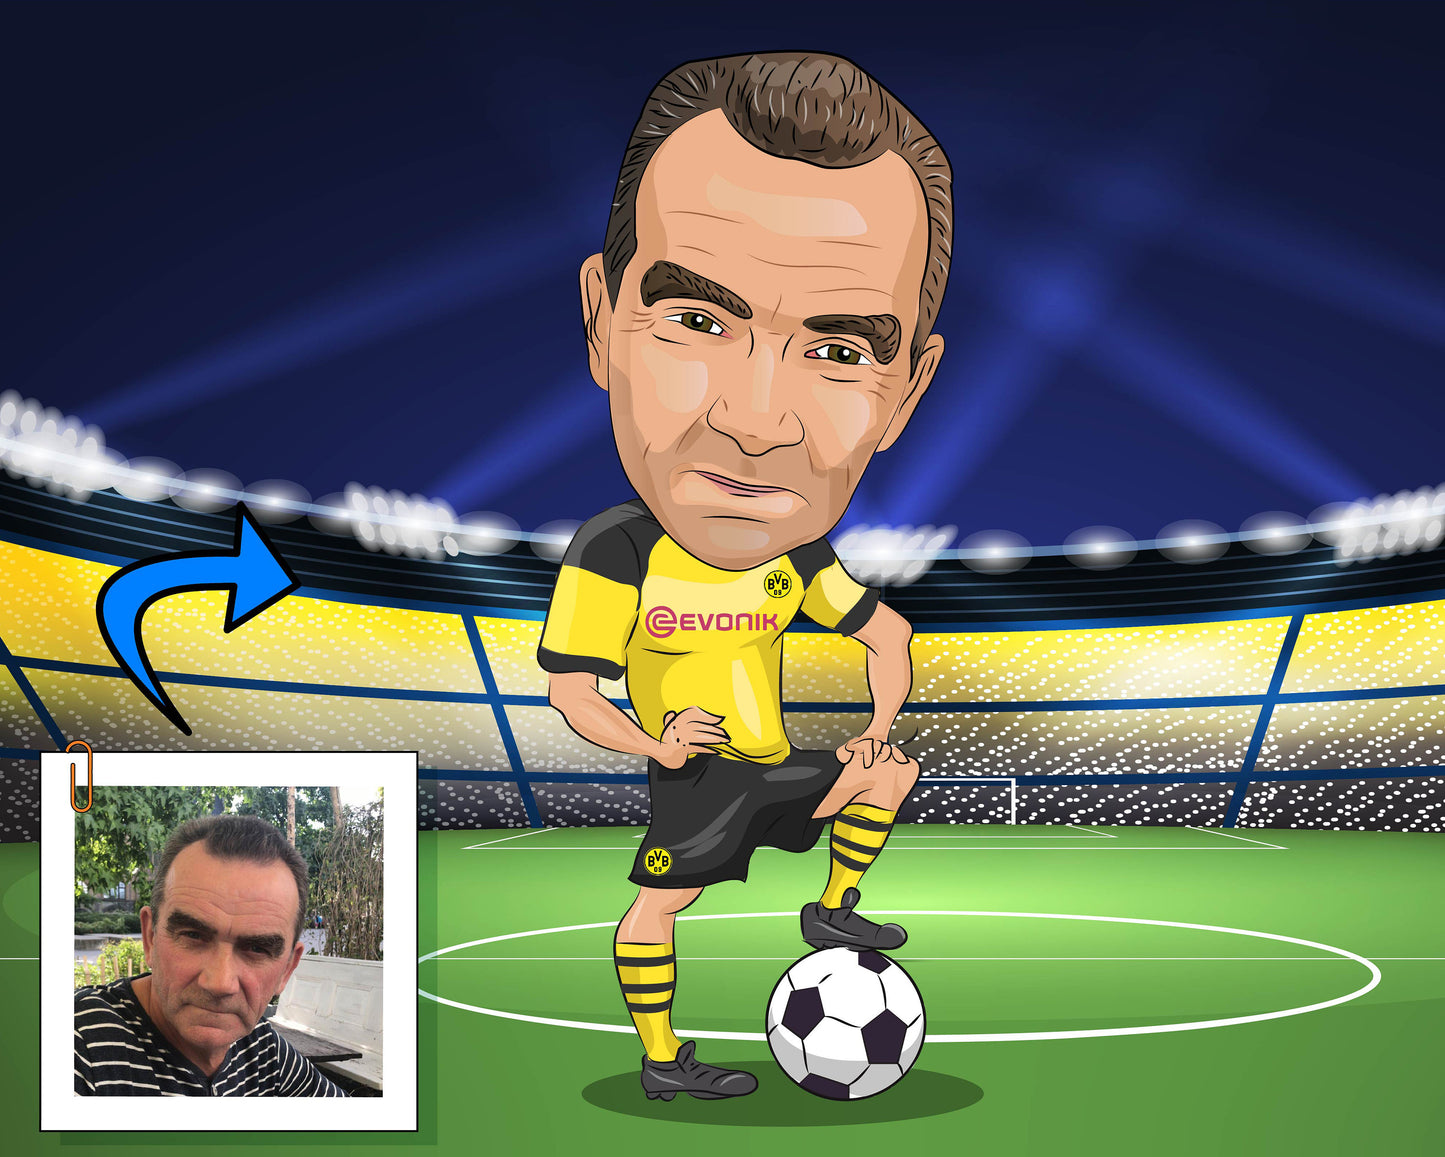 Soccer Coach Gift - Custom Caricature Portrait From Your Photo